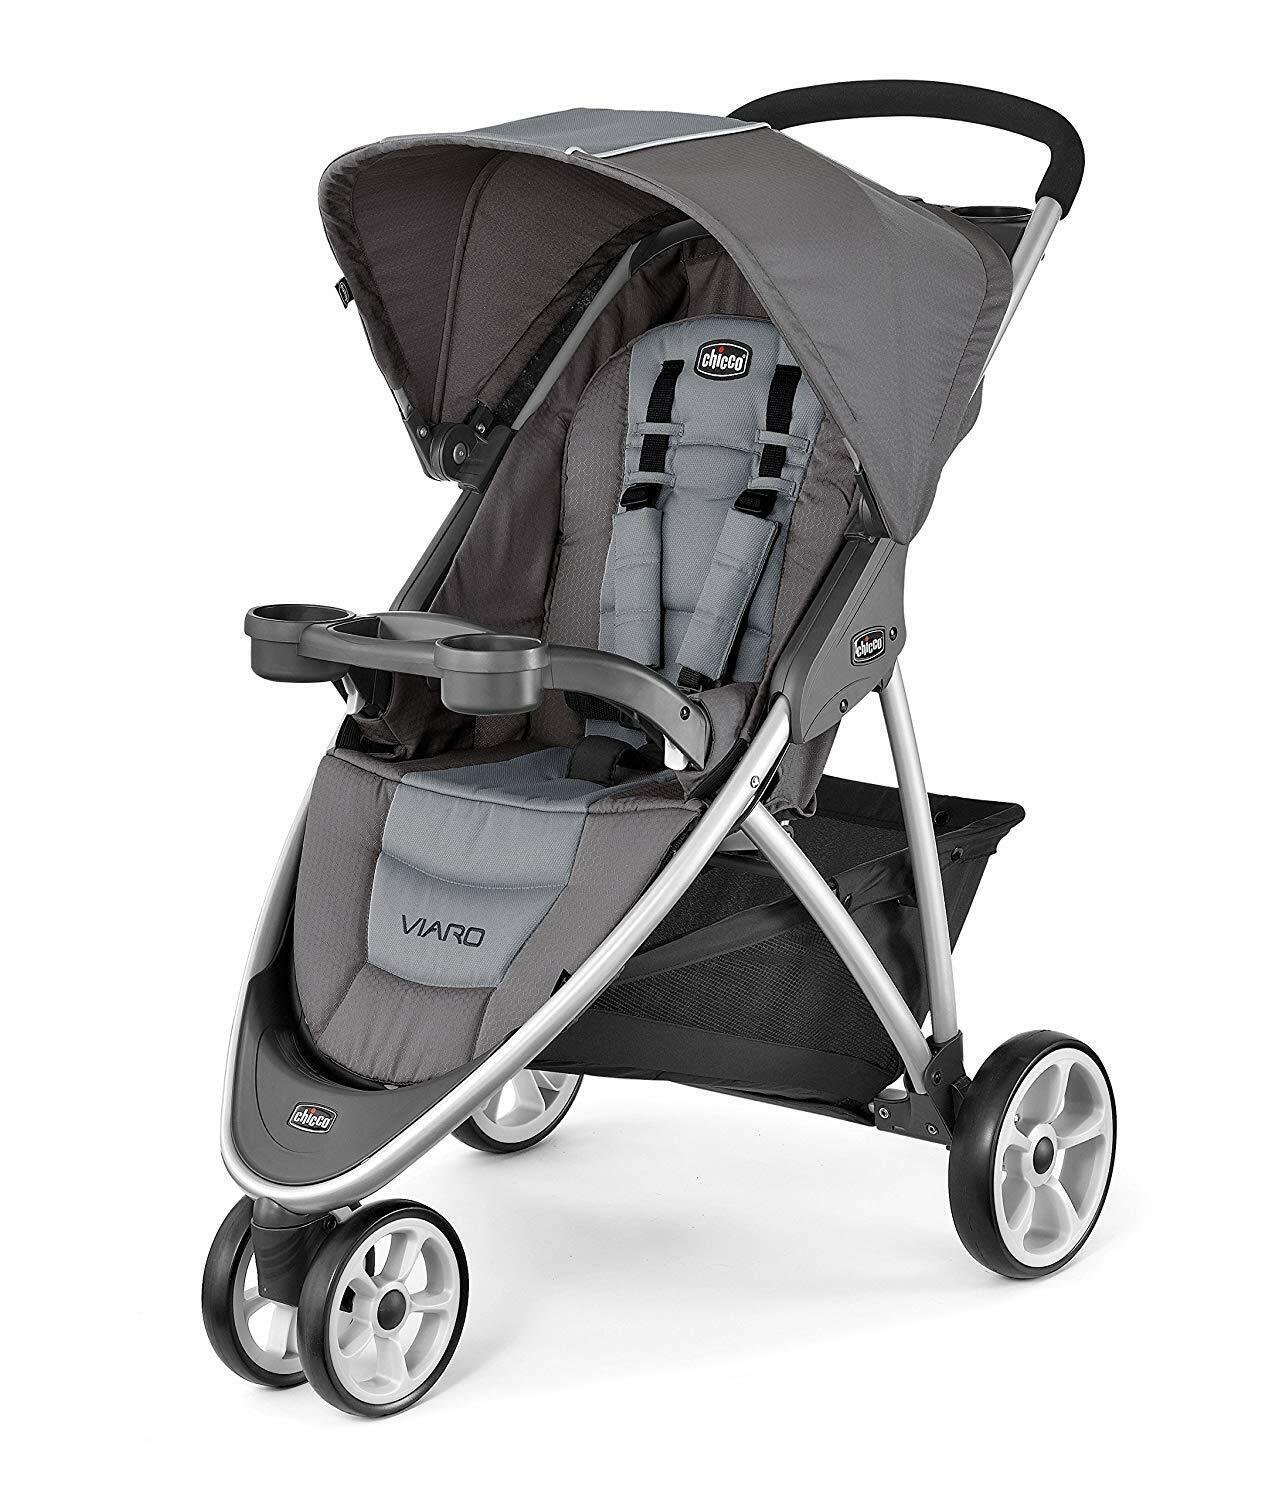 Chicco Viaro Quick Fold Baby Child Stroller Grey Storage Under Seat Basket Toys Chicco Does Not Apply - фотография #2